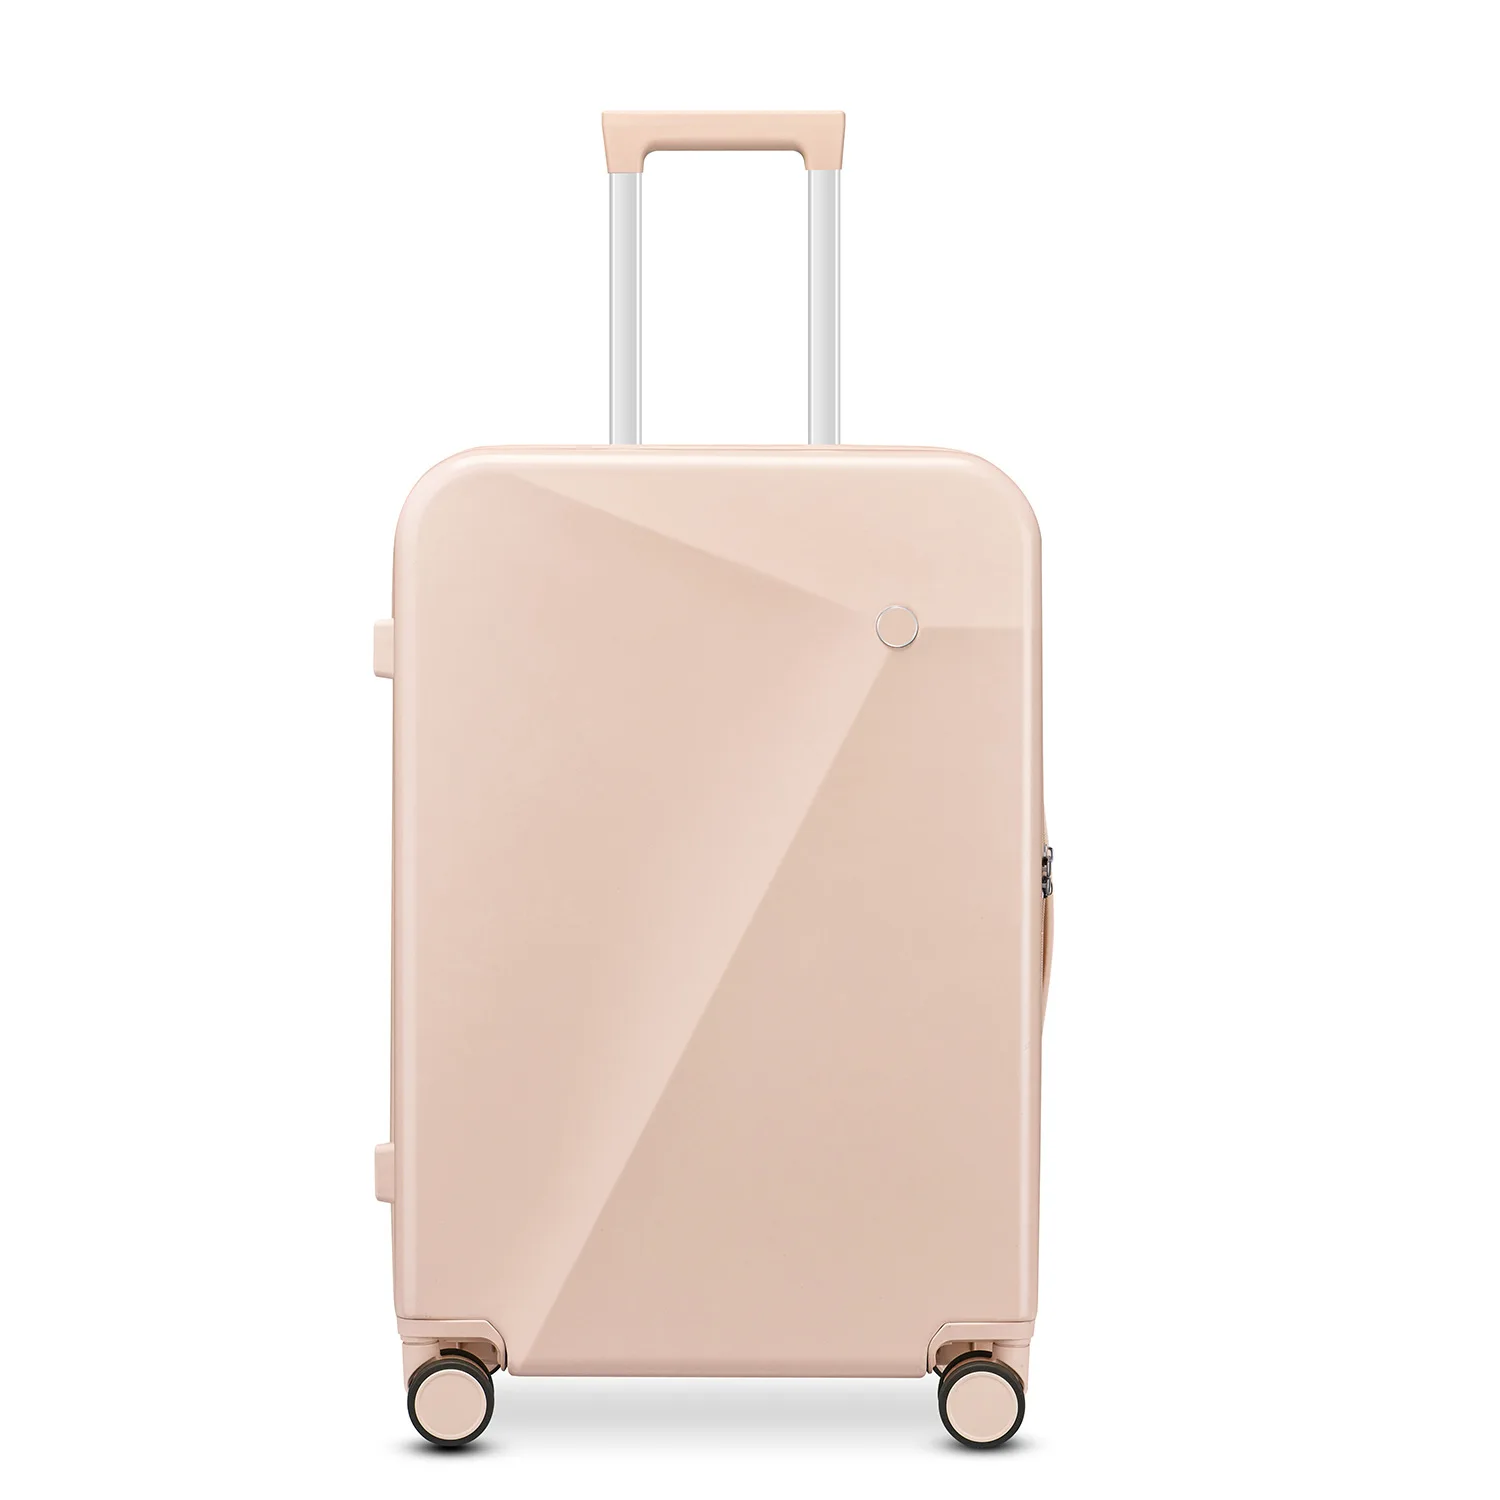 Quiet rotating travel luggage  G508-464600